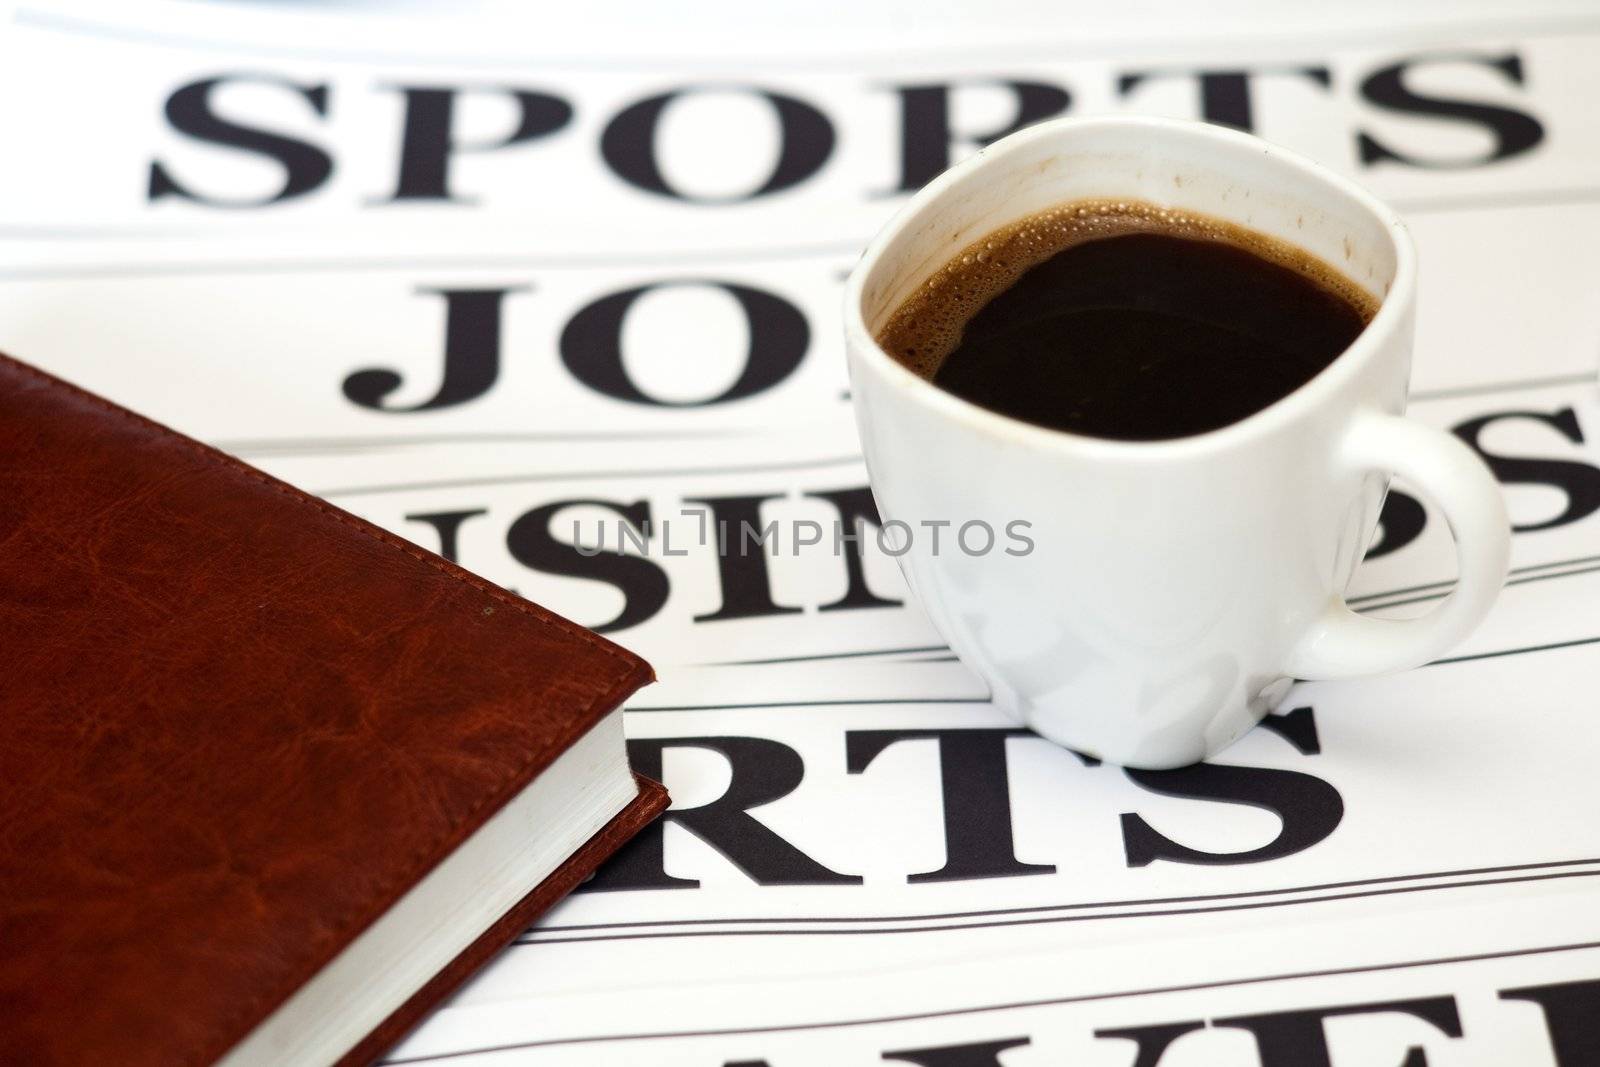 An image of a cup of coffee and a newspaper